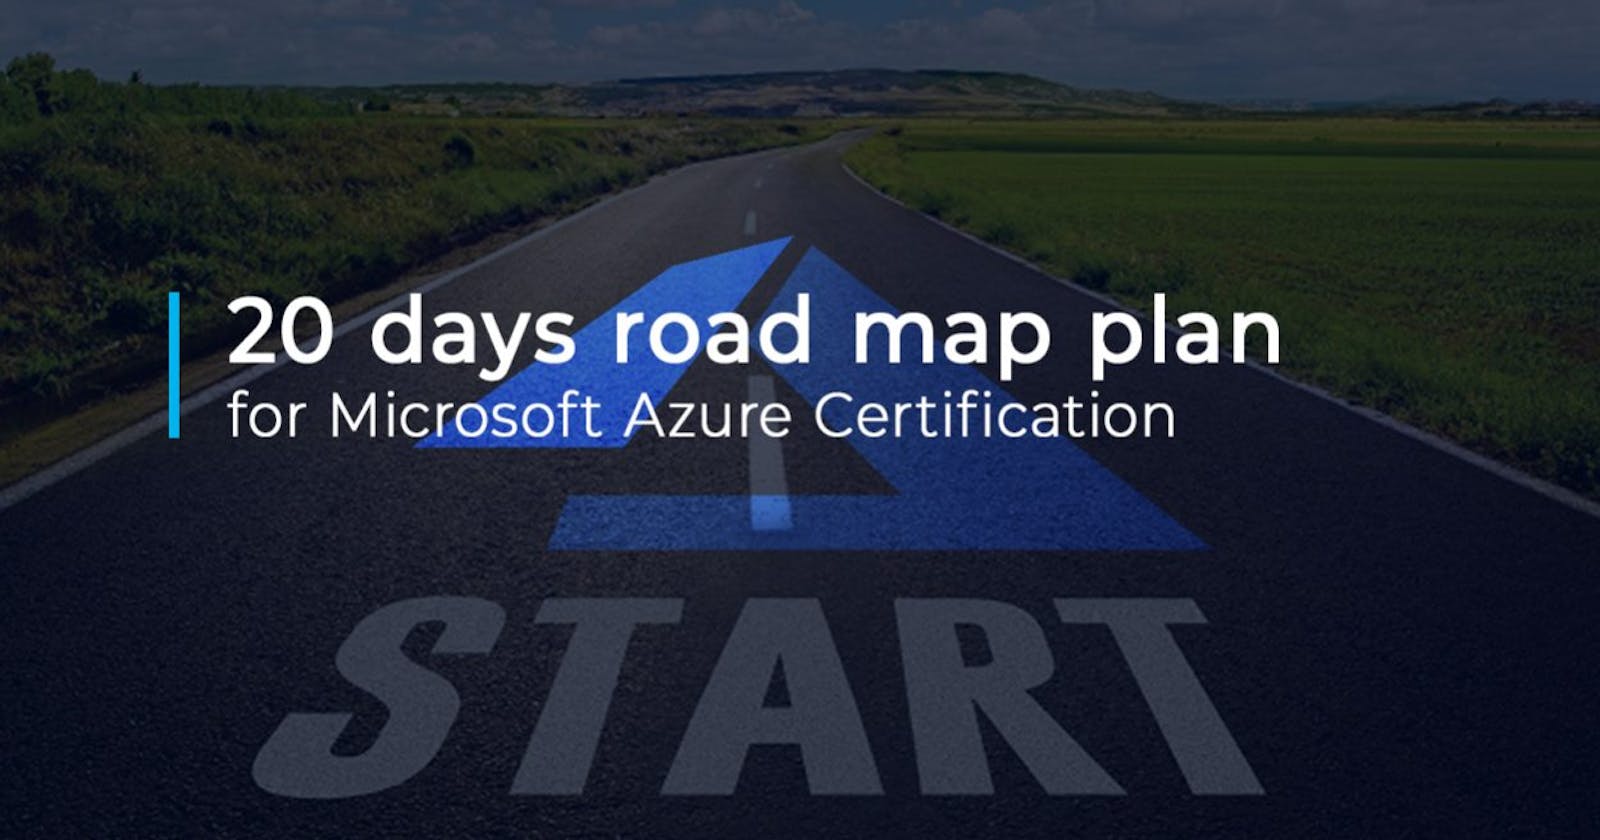 20 days road map plan for Microsoft Azure Certification